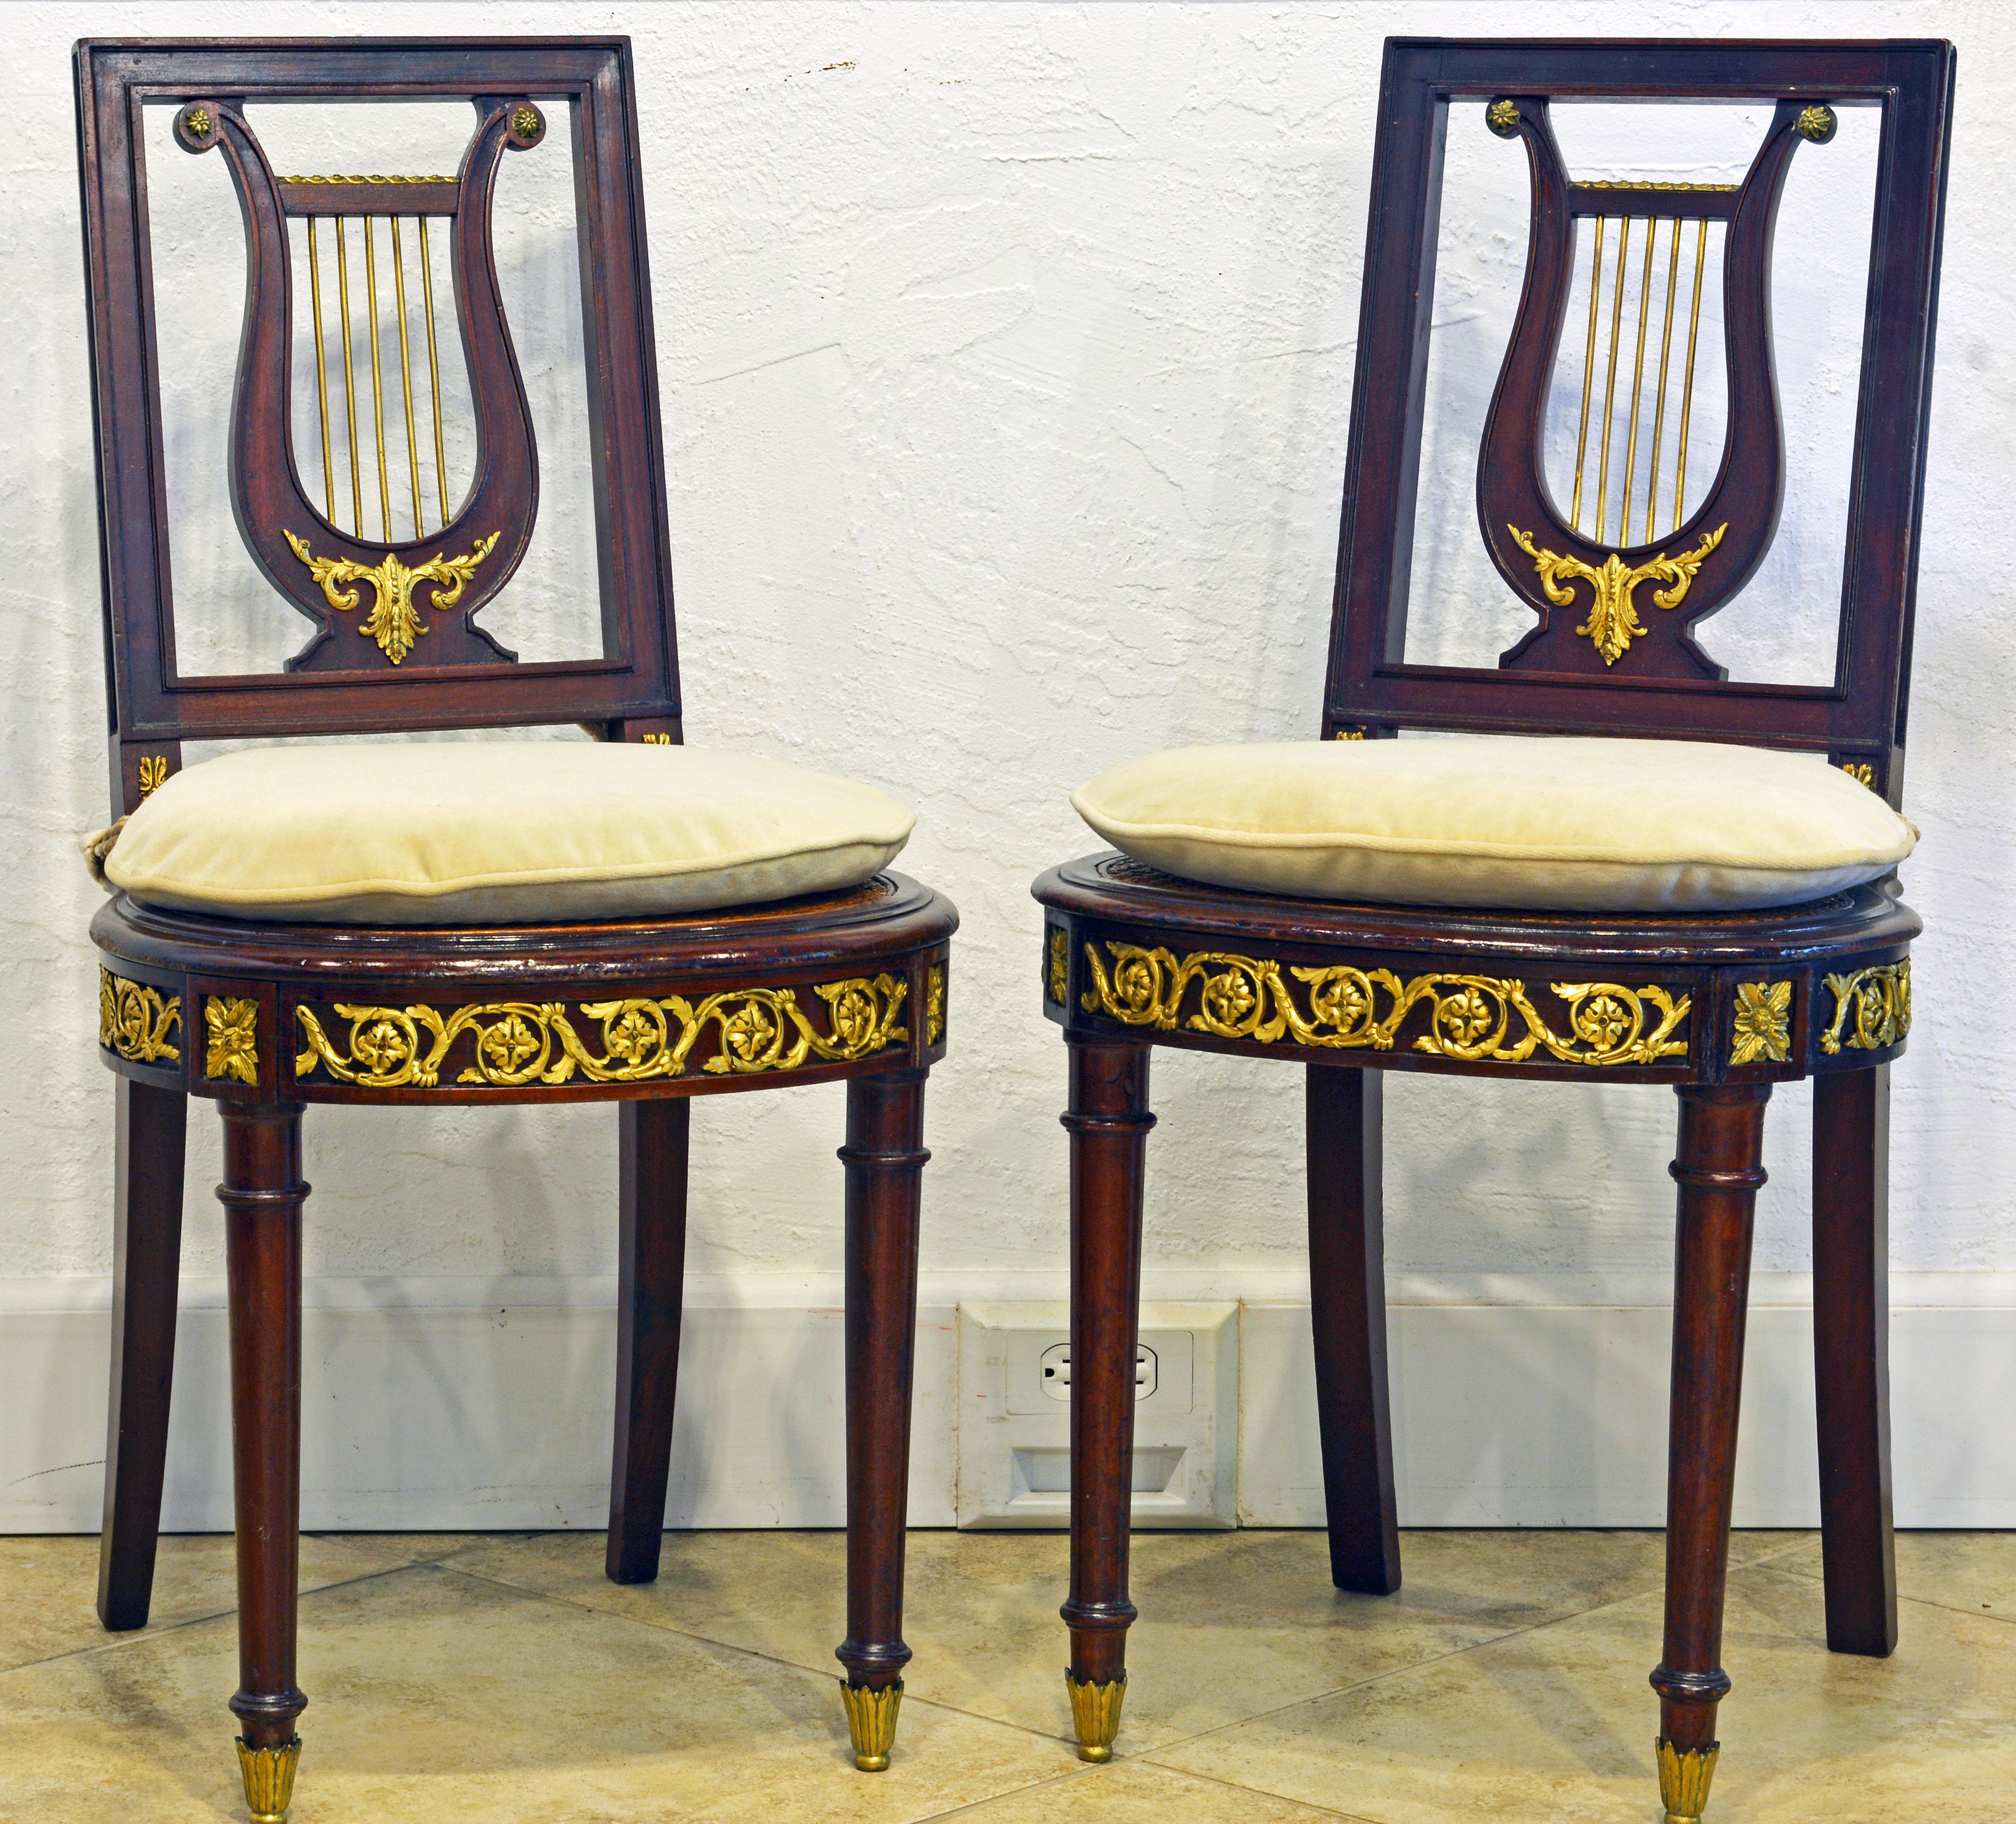 Dating to the late 19th century these elegant richly ormolu mounted French side chairs have caned seats in good condition, but tasteful cushions have been made for increased comfort. These are beautiful accent chairs eventually for a music room.